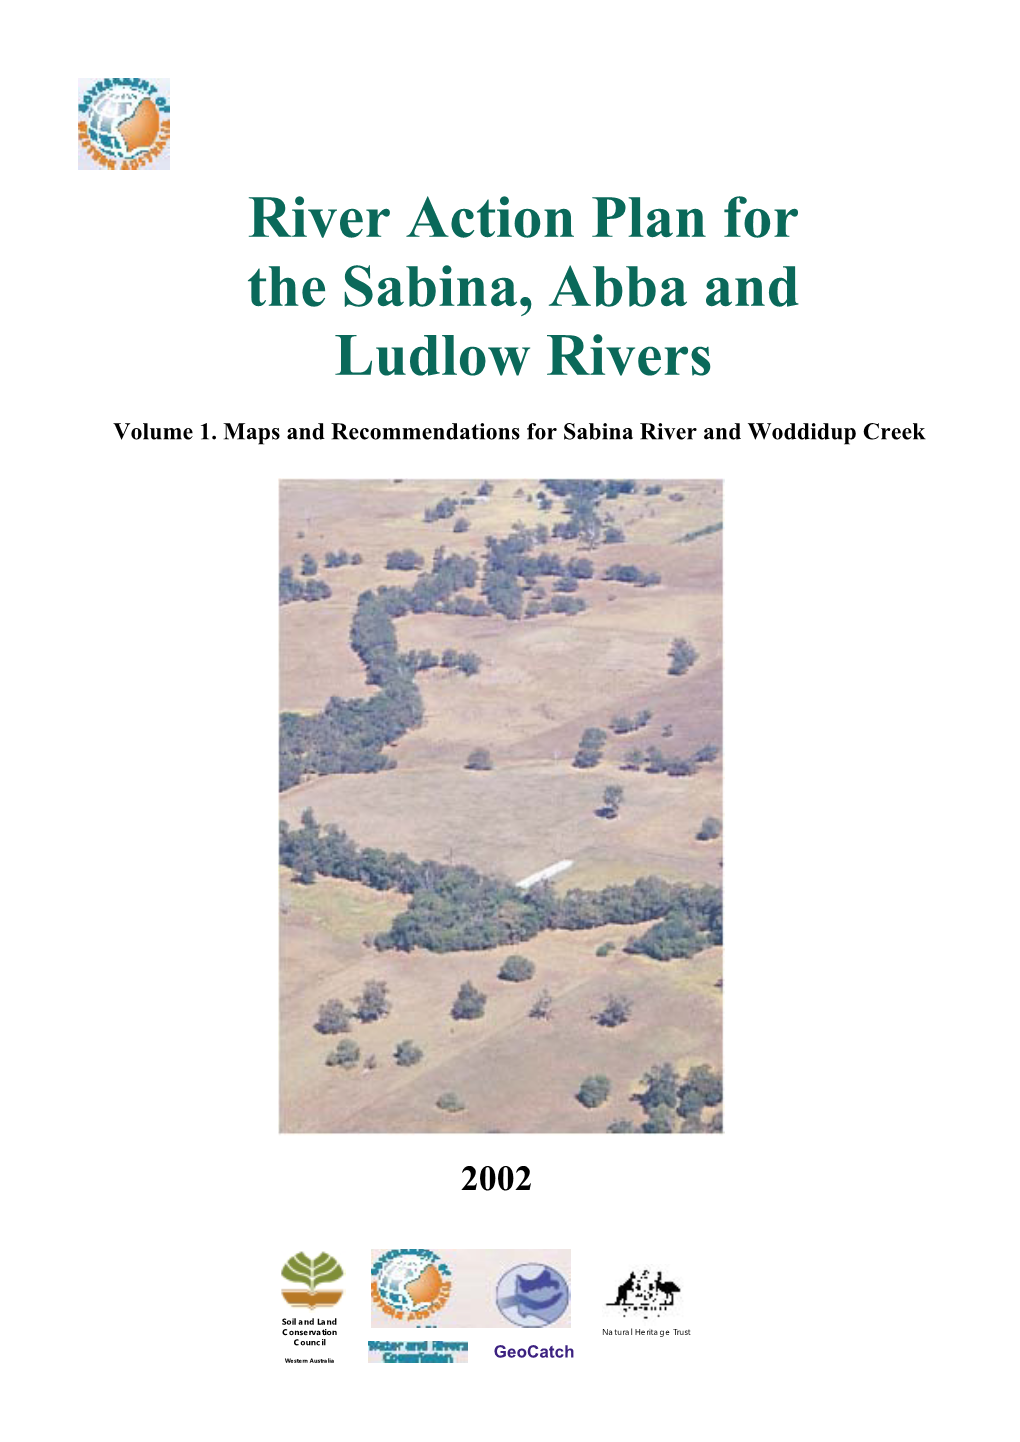 River Action Plan for the Sabina, Abba and Ludlow Rivers Vol 1. 2002